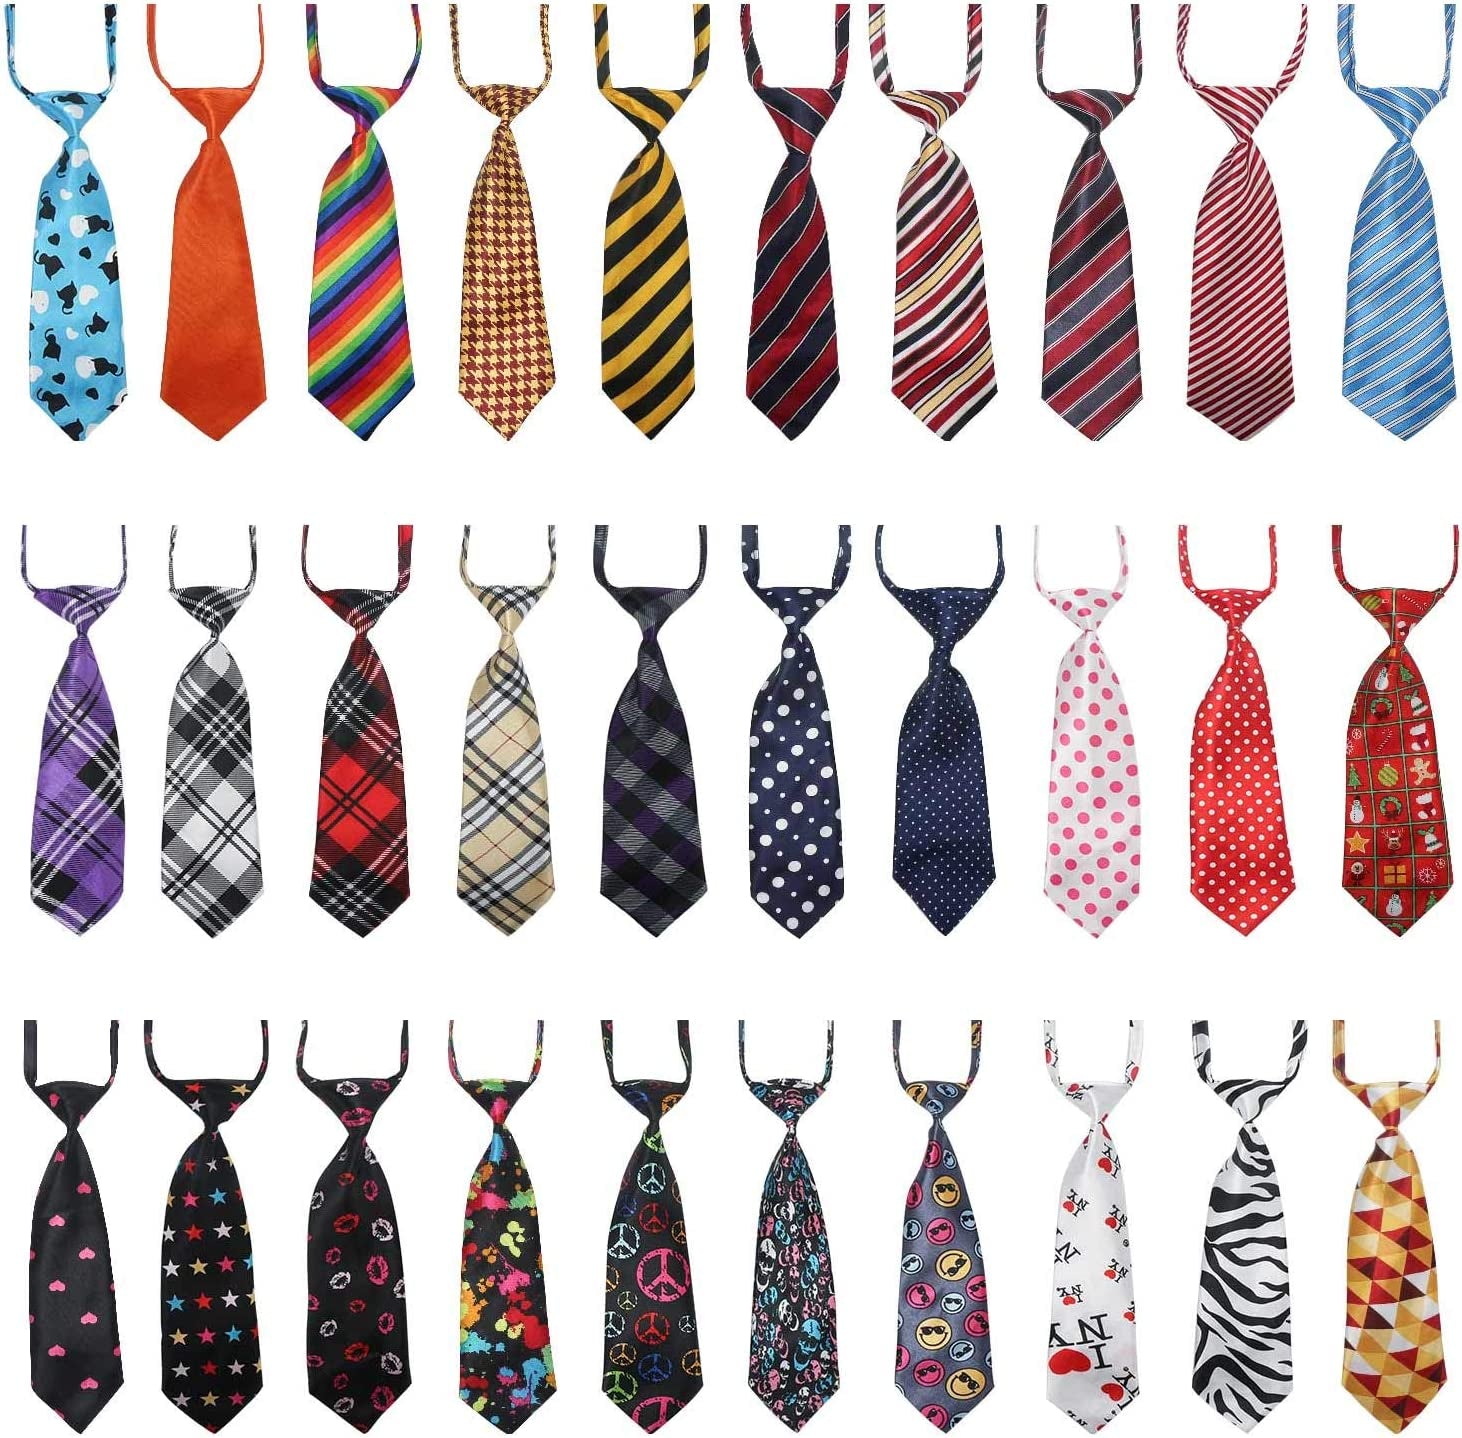 Segarty Dog Ties 30 PCS Dog Neckties, Adjustable Dog Neck Ties and Bows for Medium Large Dog Festival Formal Bulk Pet Bowties Collar Grooming Dogs Accessories Holiday Birthday Wedding Costumes Animals & Pet Supplies > Pet Supplies > Dog Supplies > Dog Apparel Segarty 30PCS, Multi-Colored B  